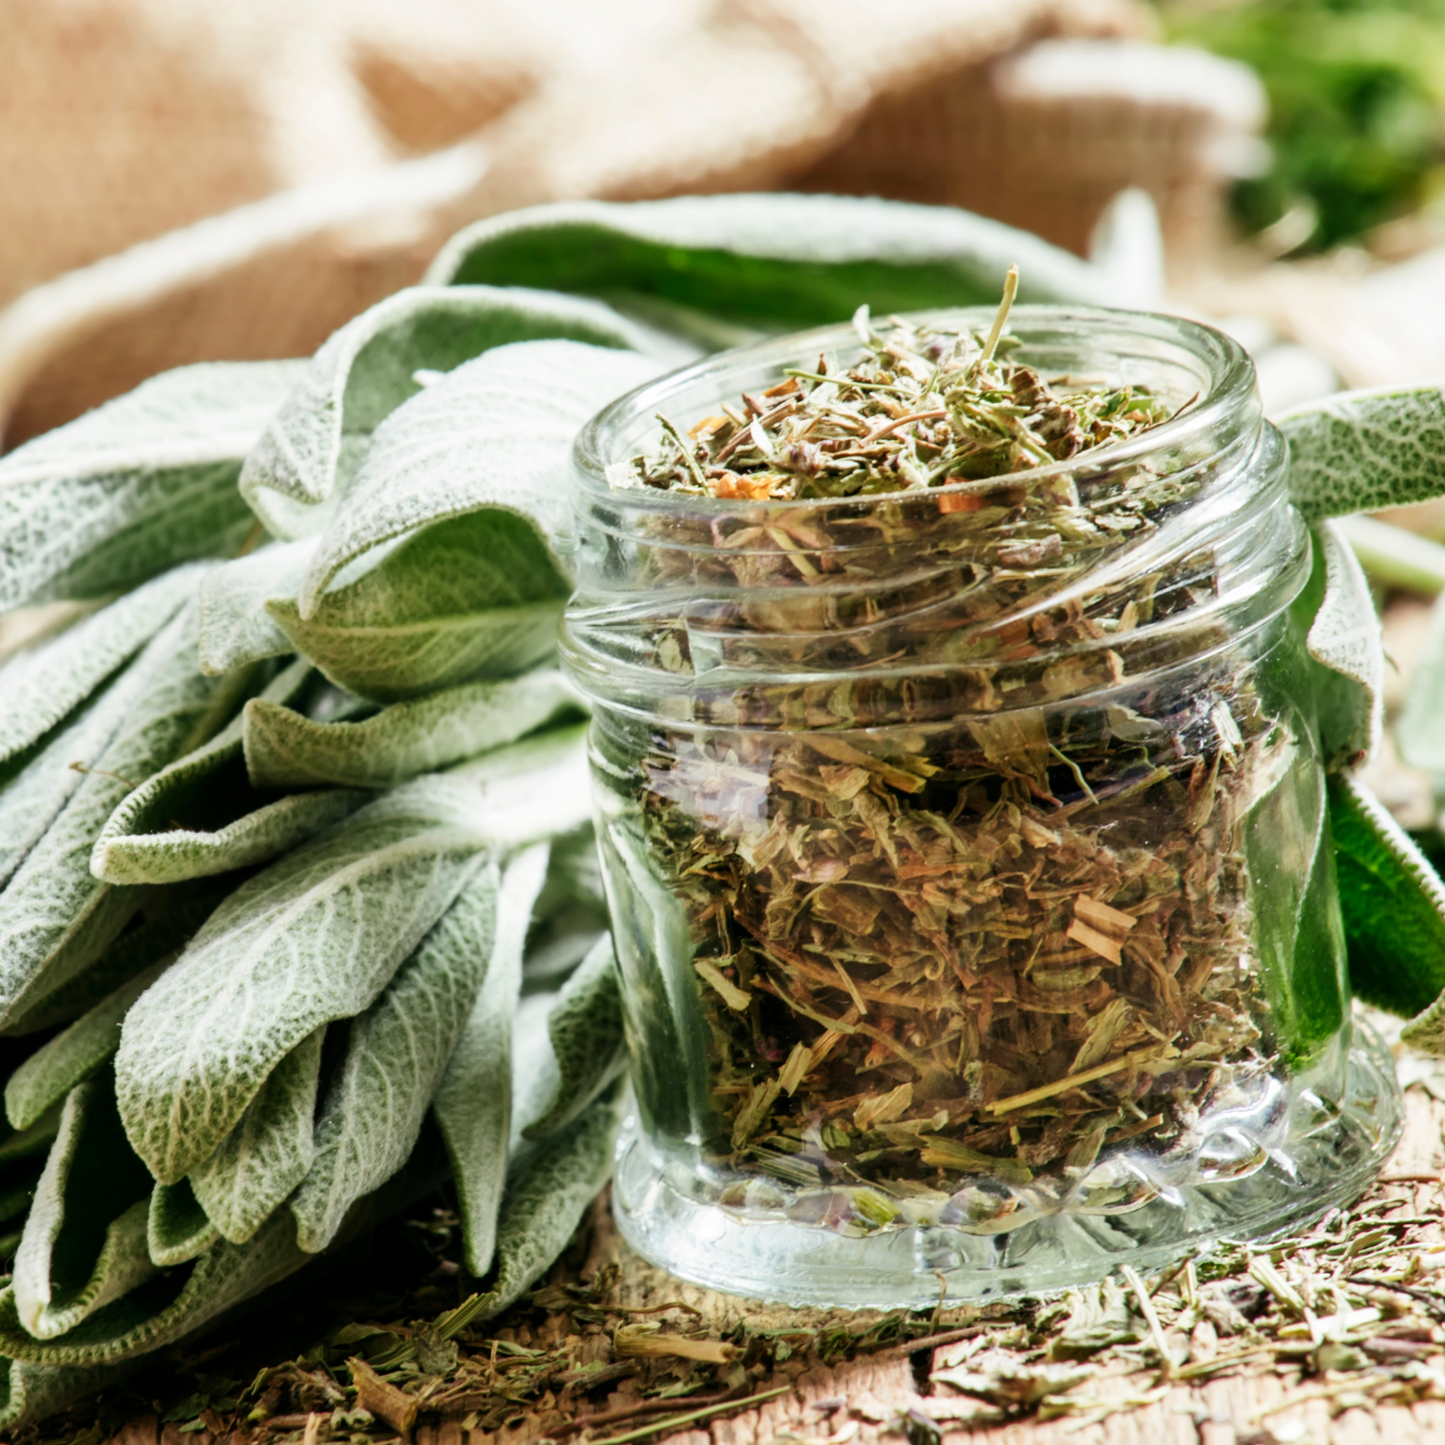 Sage Herb For Clearing Negative Energy Smudging and Air Purification of a Space